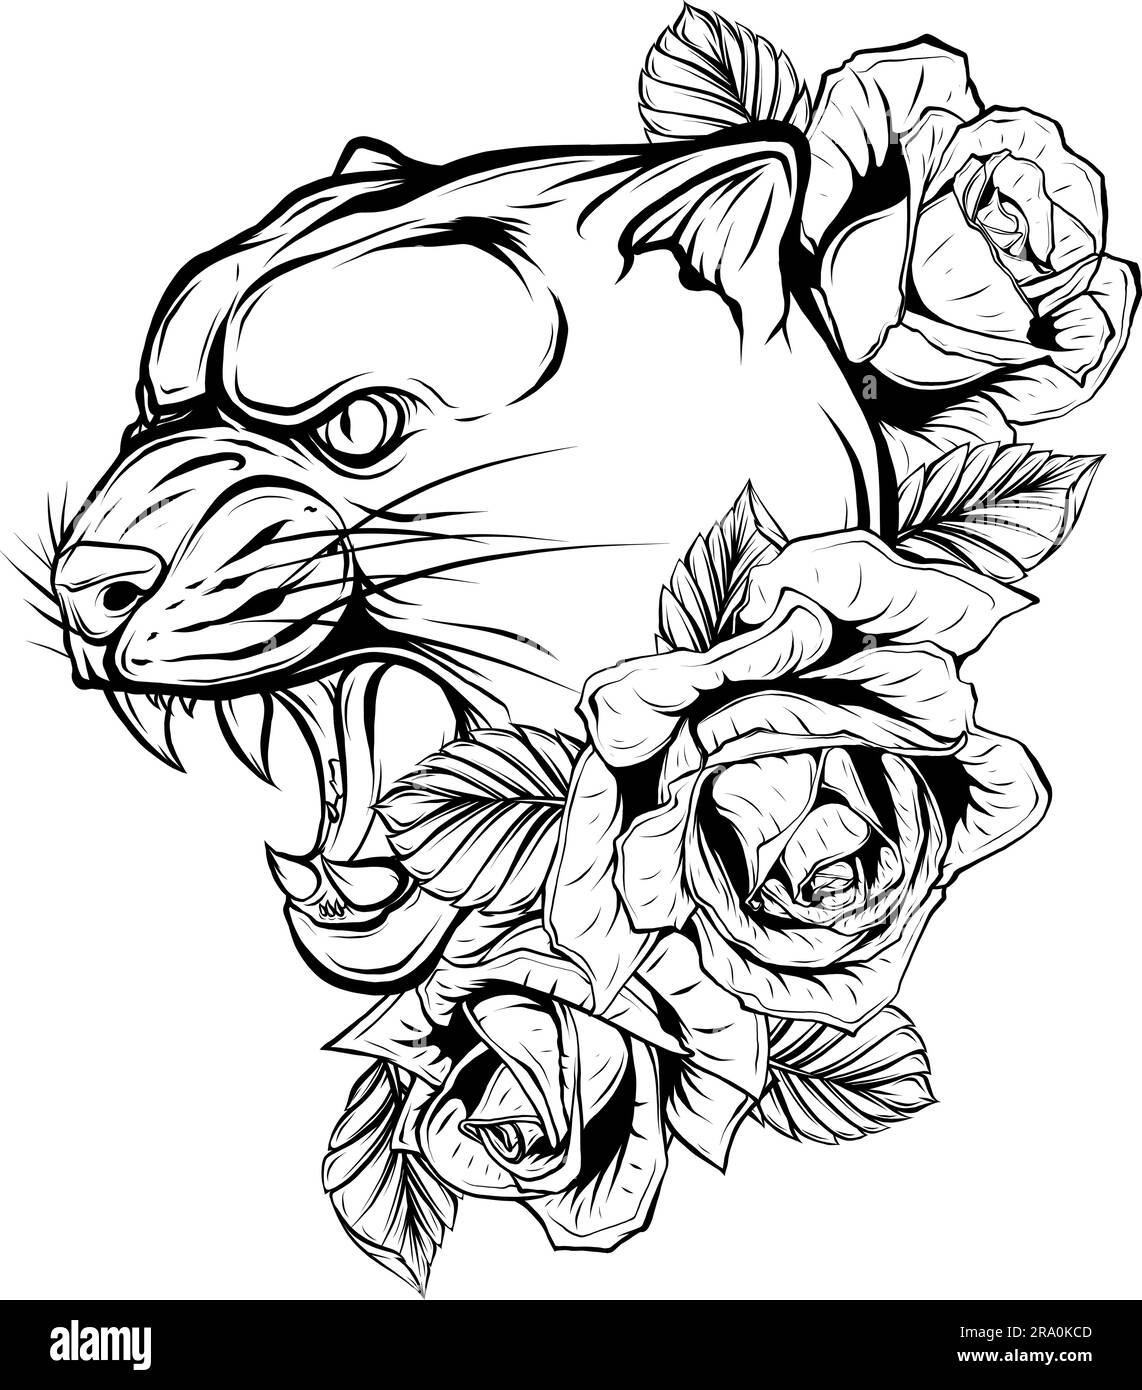 cougar head vector illustration black and white color Stock Vector